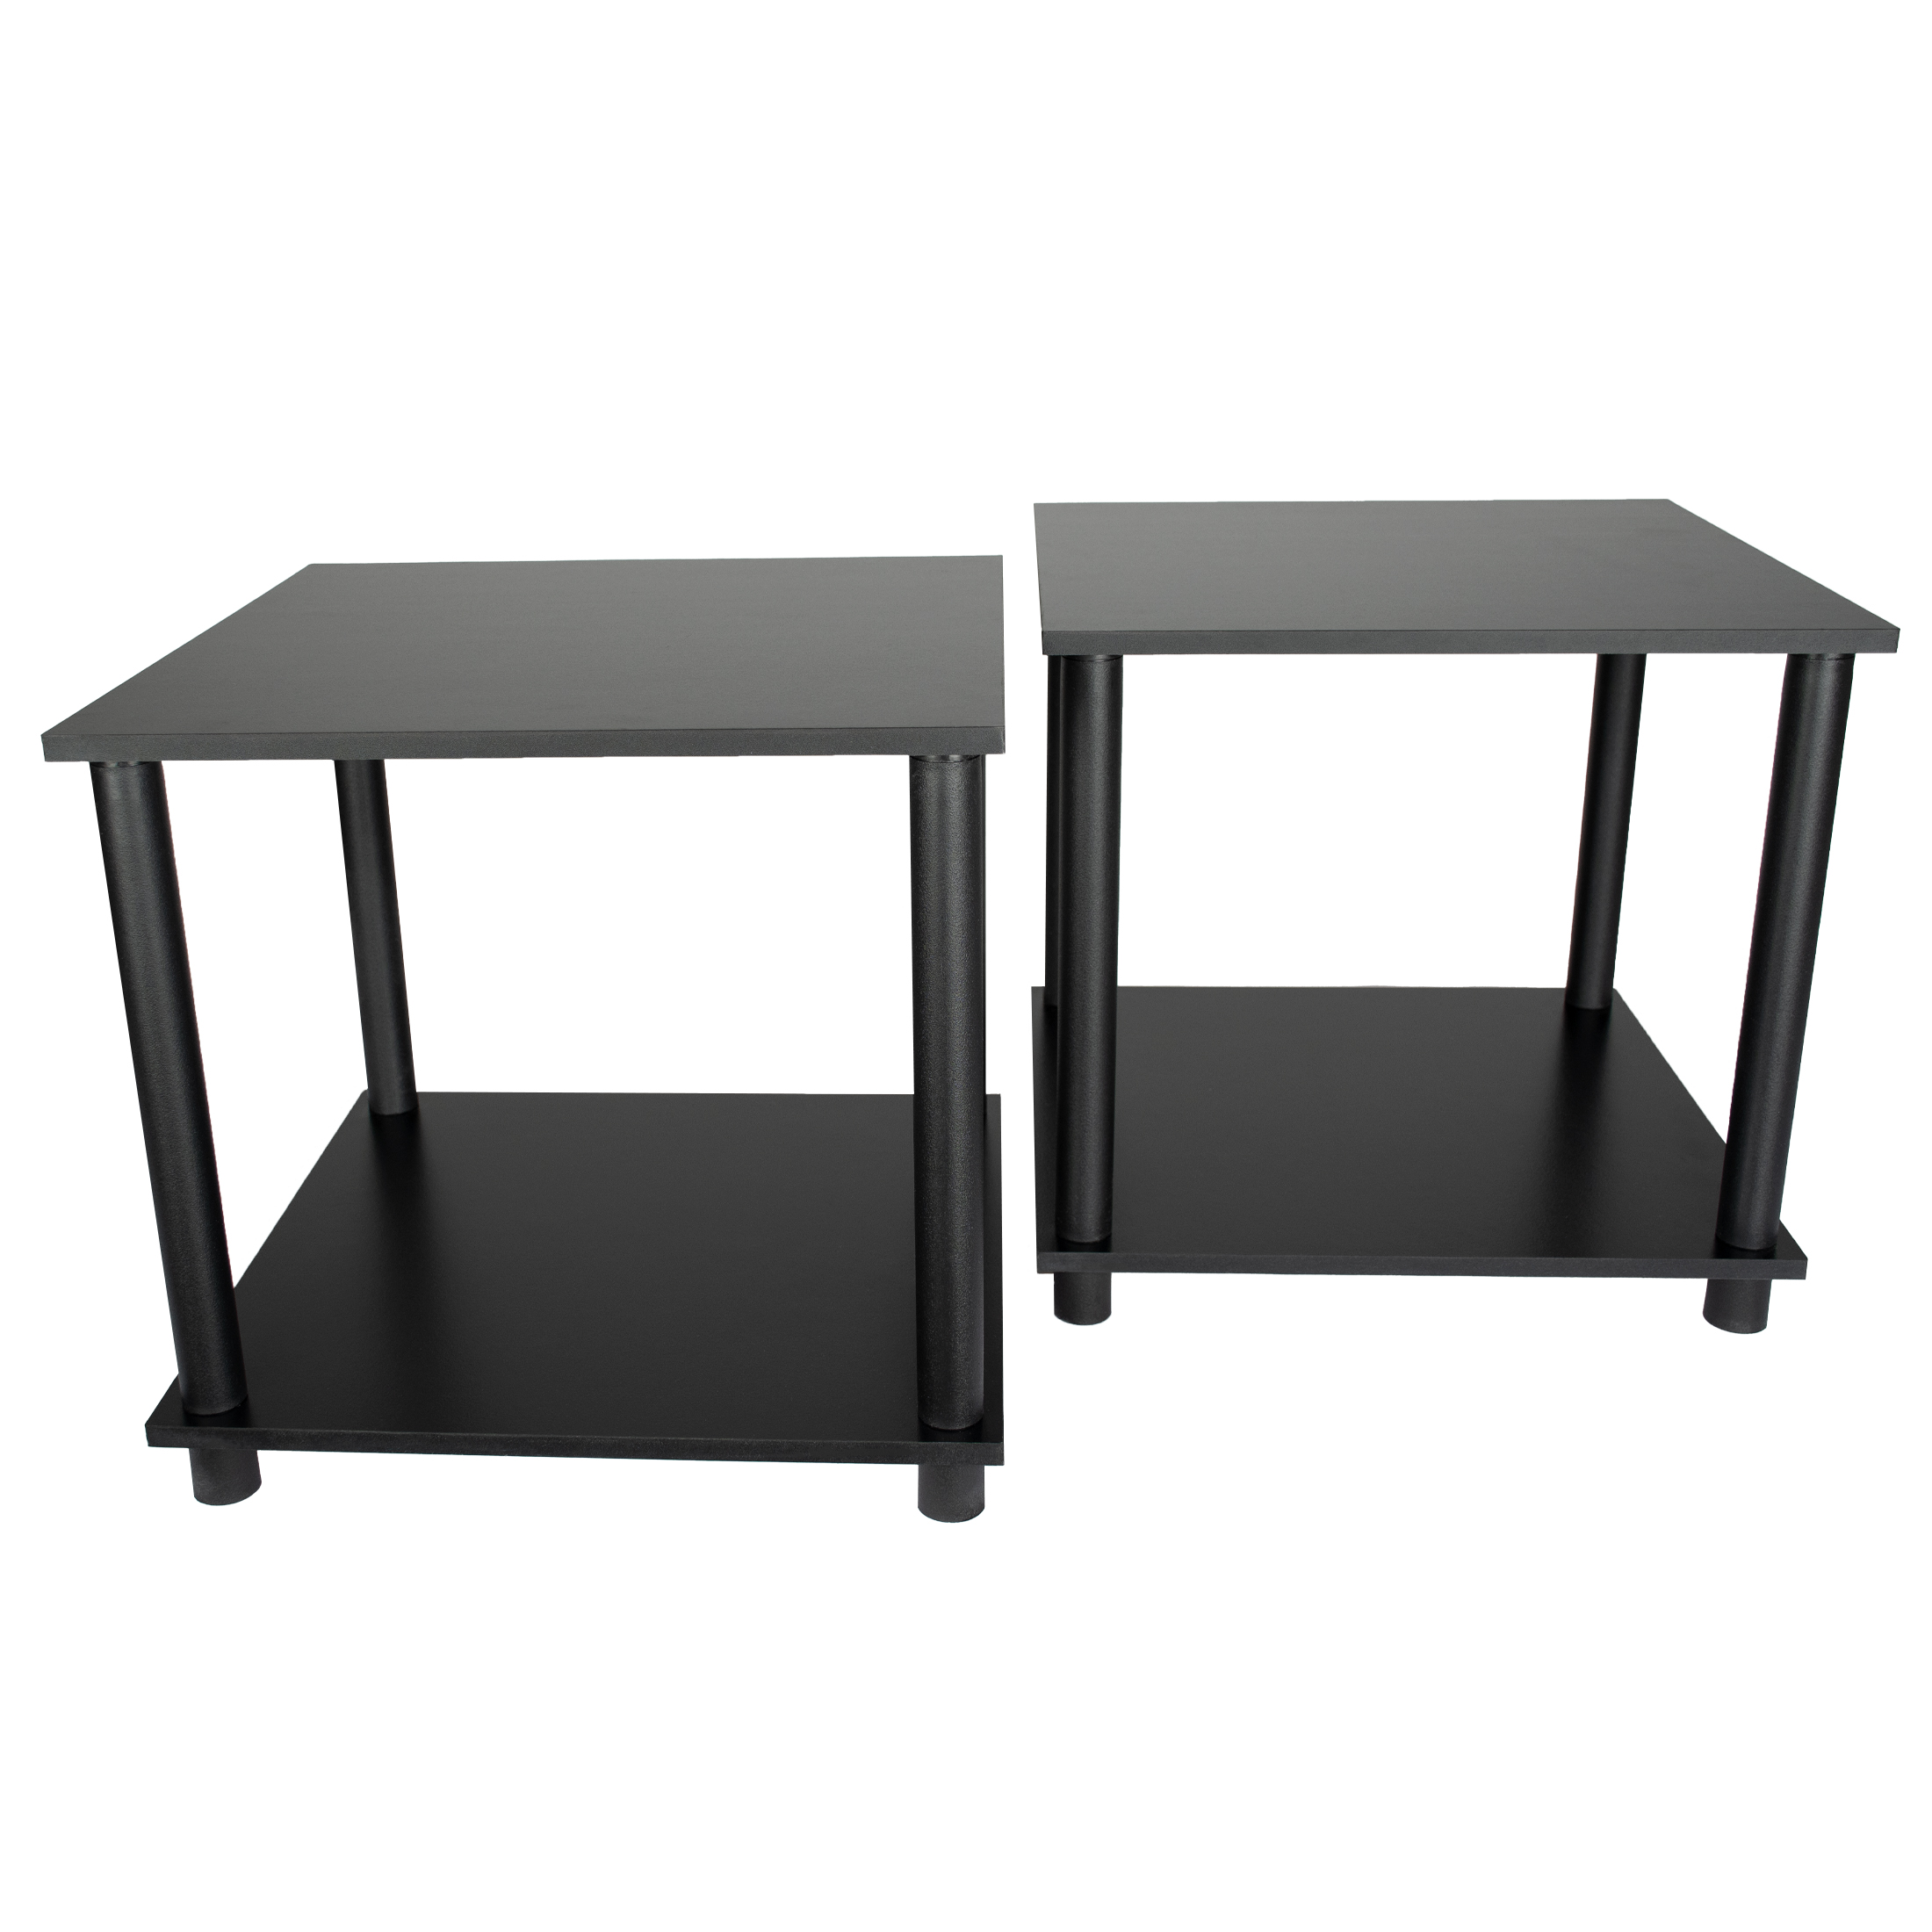 Mainstays No Tools End Tables, Solid Black, Set of 2 - image 2 of 8